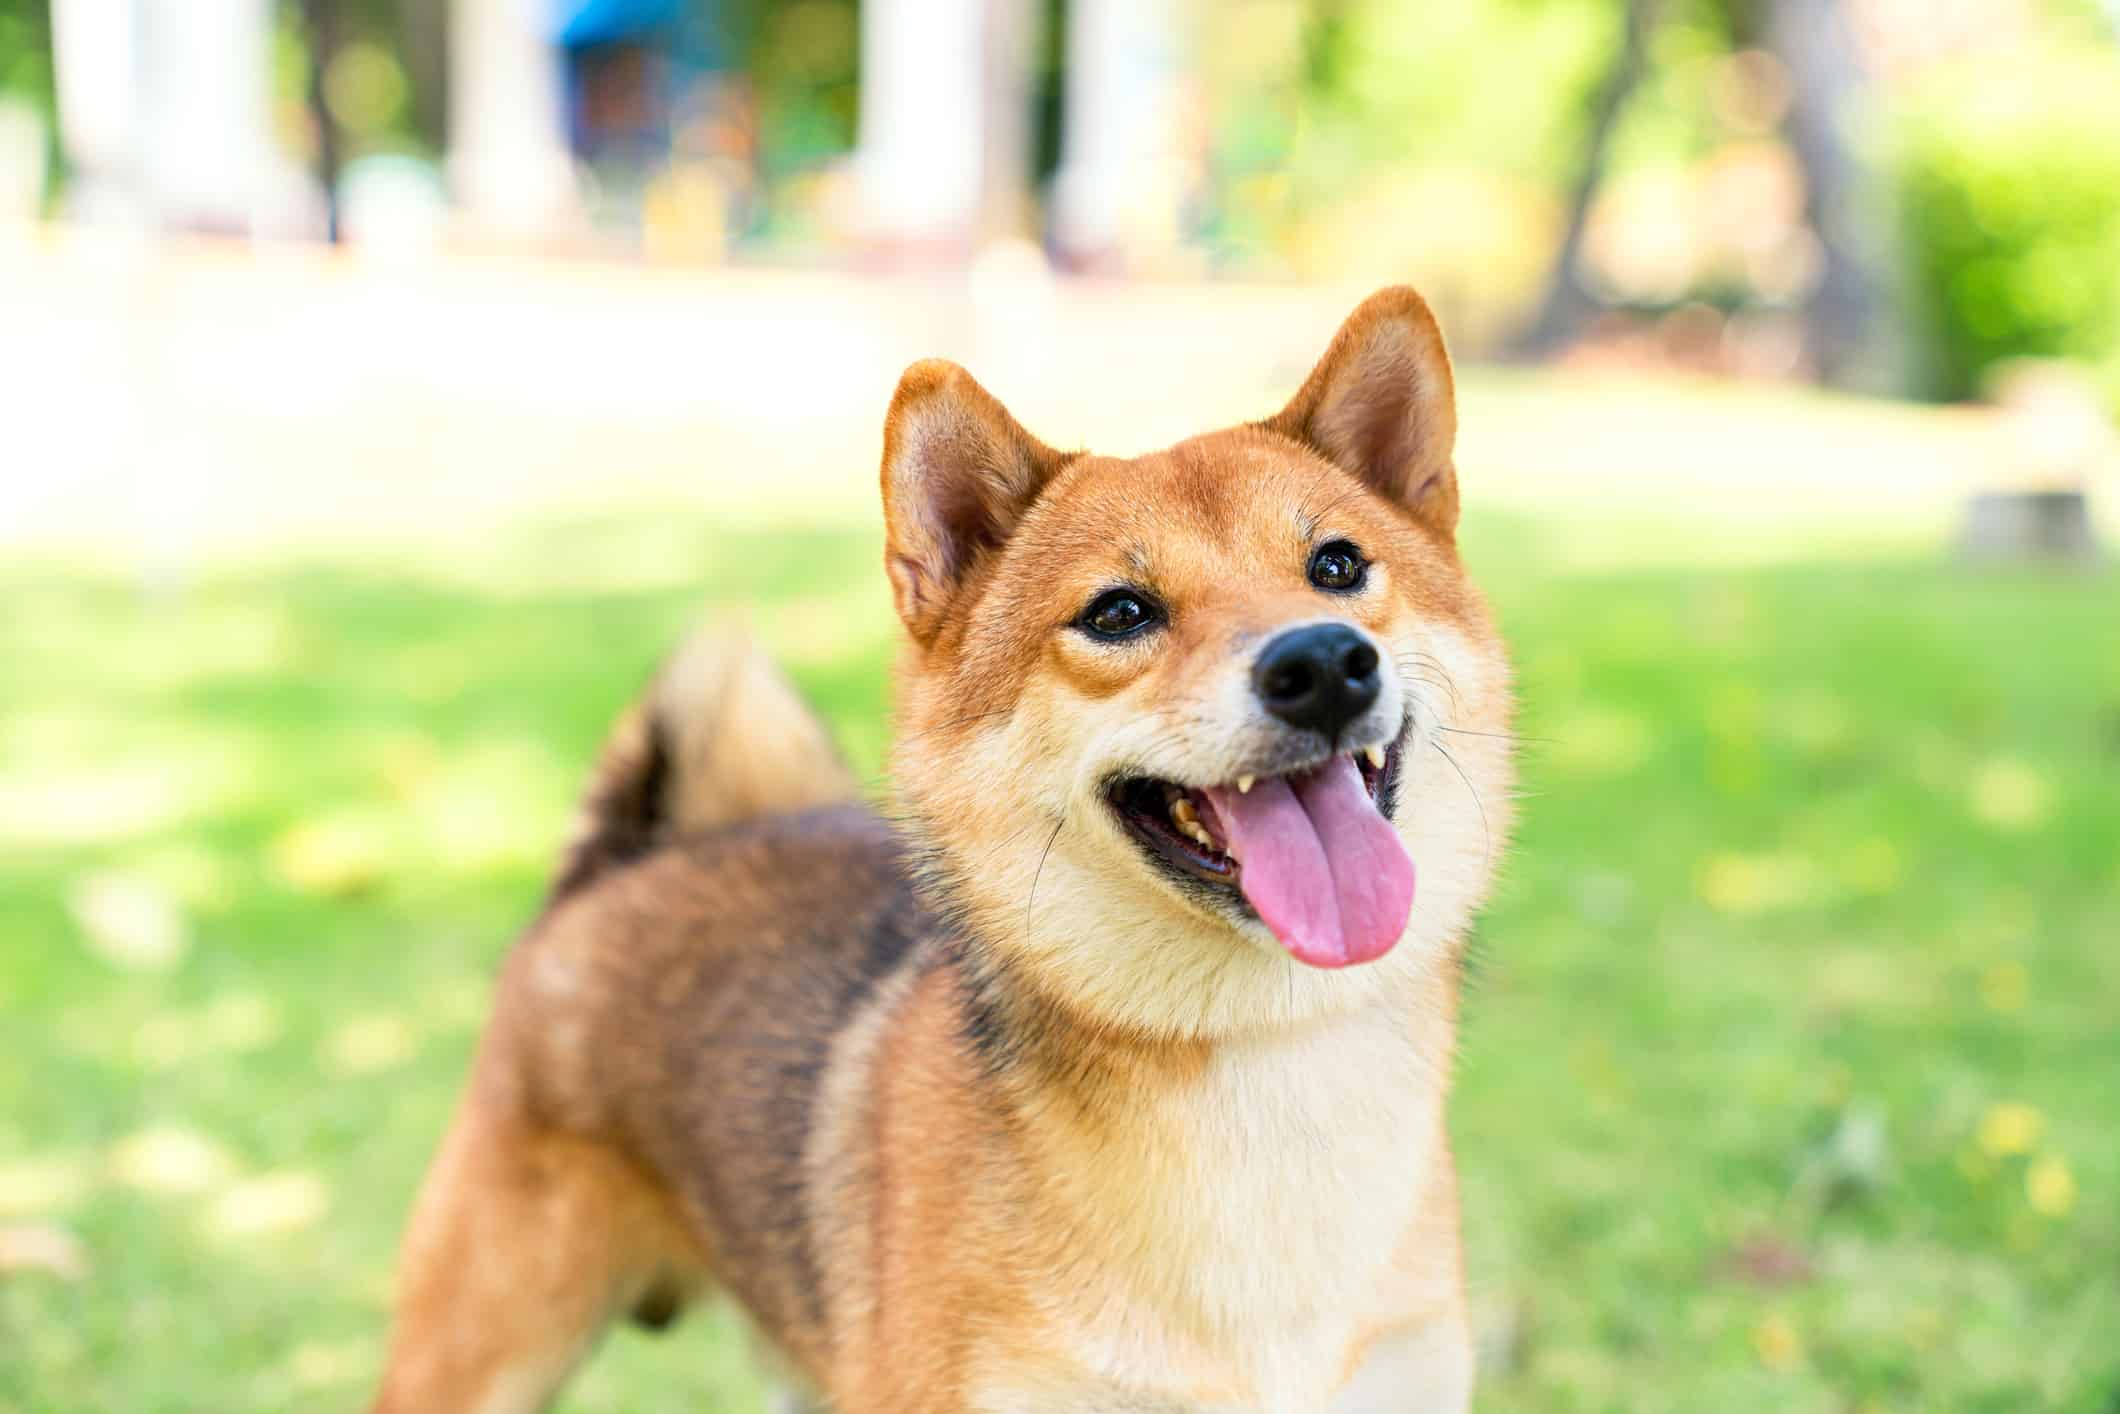 Shibarium: Why A Rise In Gas Fees Could be Bad For Shiba Inu